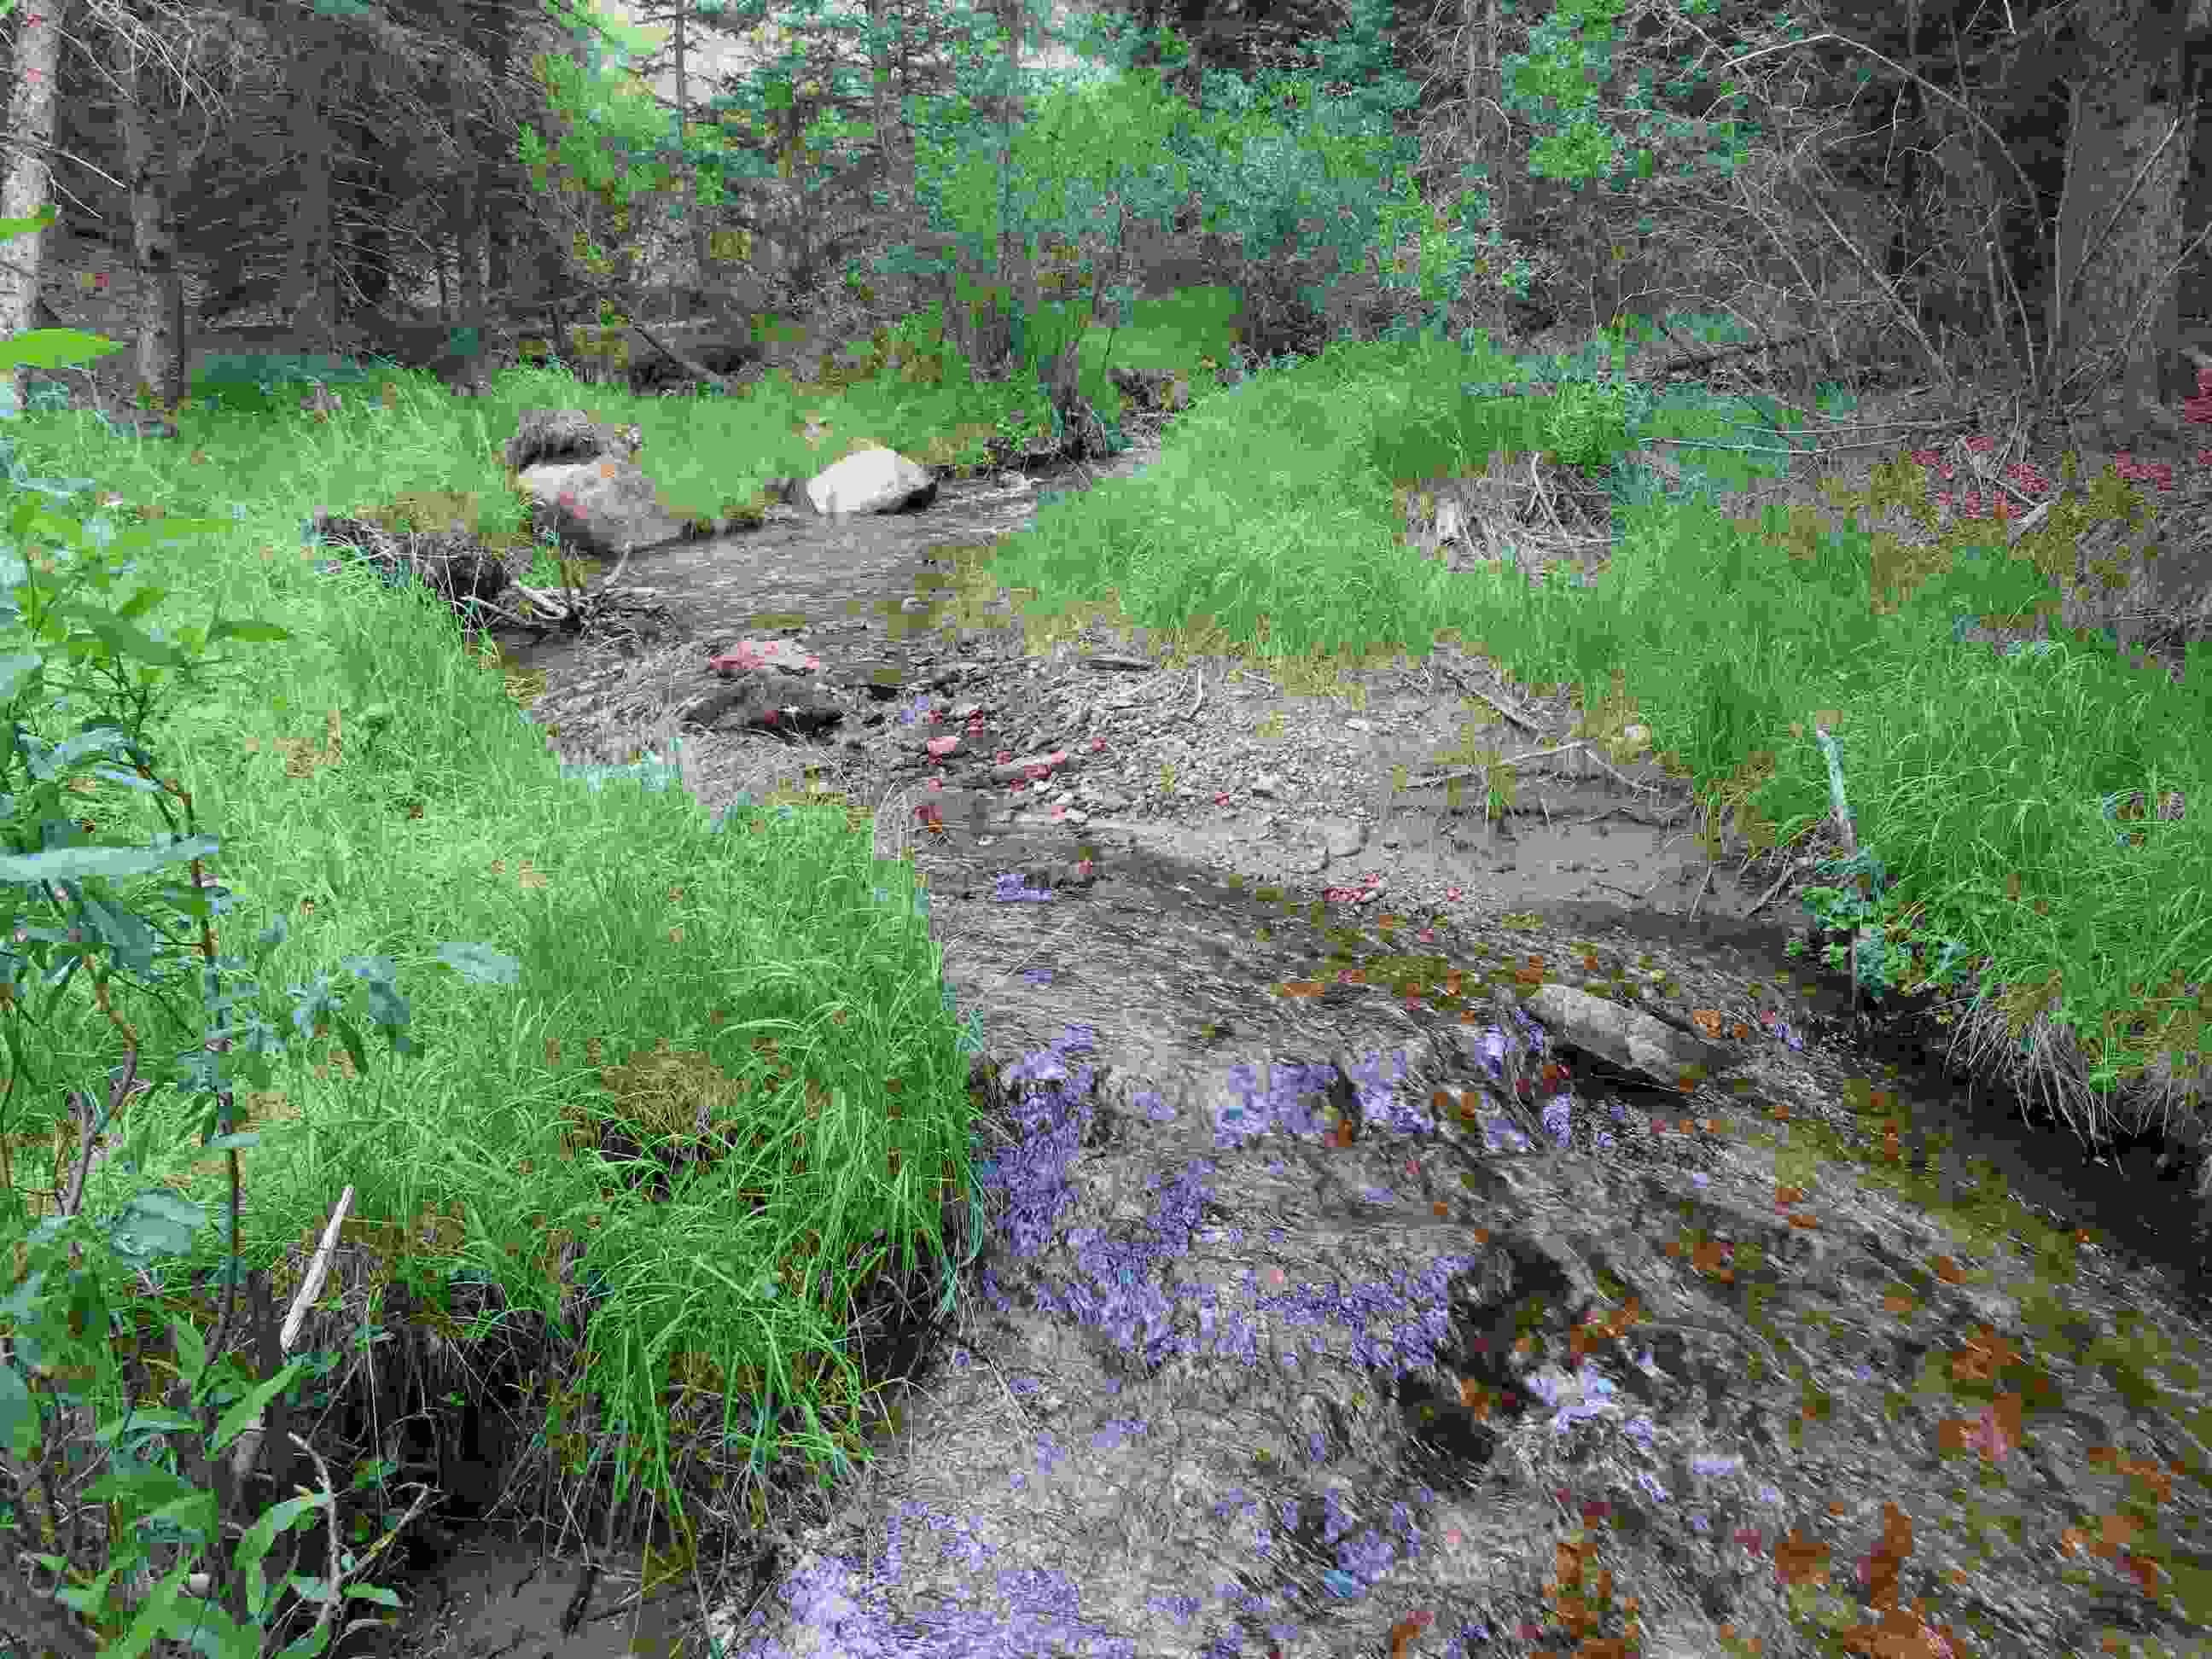 A creek flowing out of a lush green riparian area.